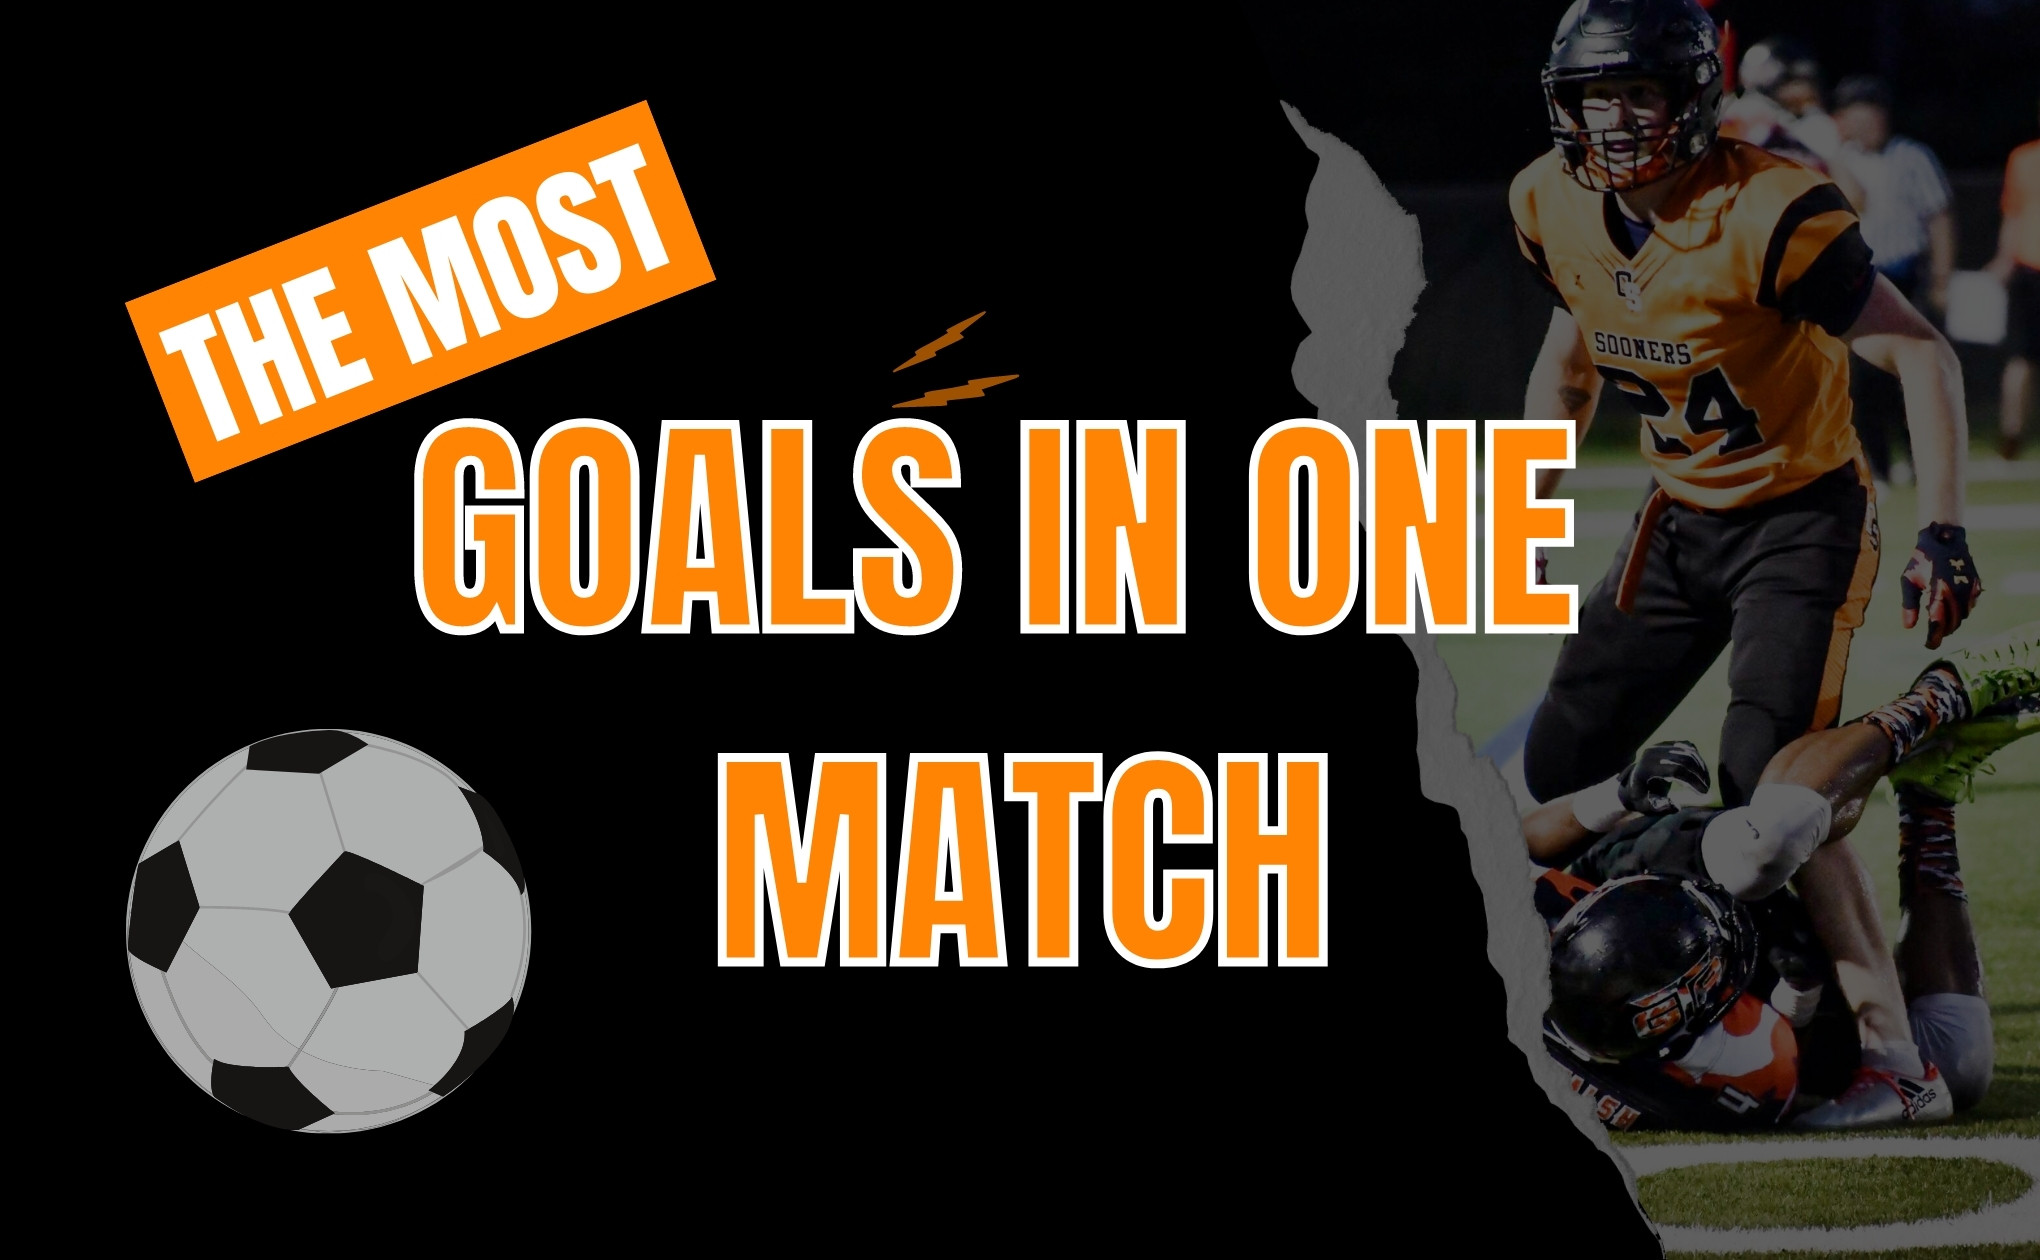 the most goals in one match